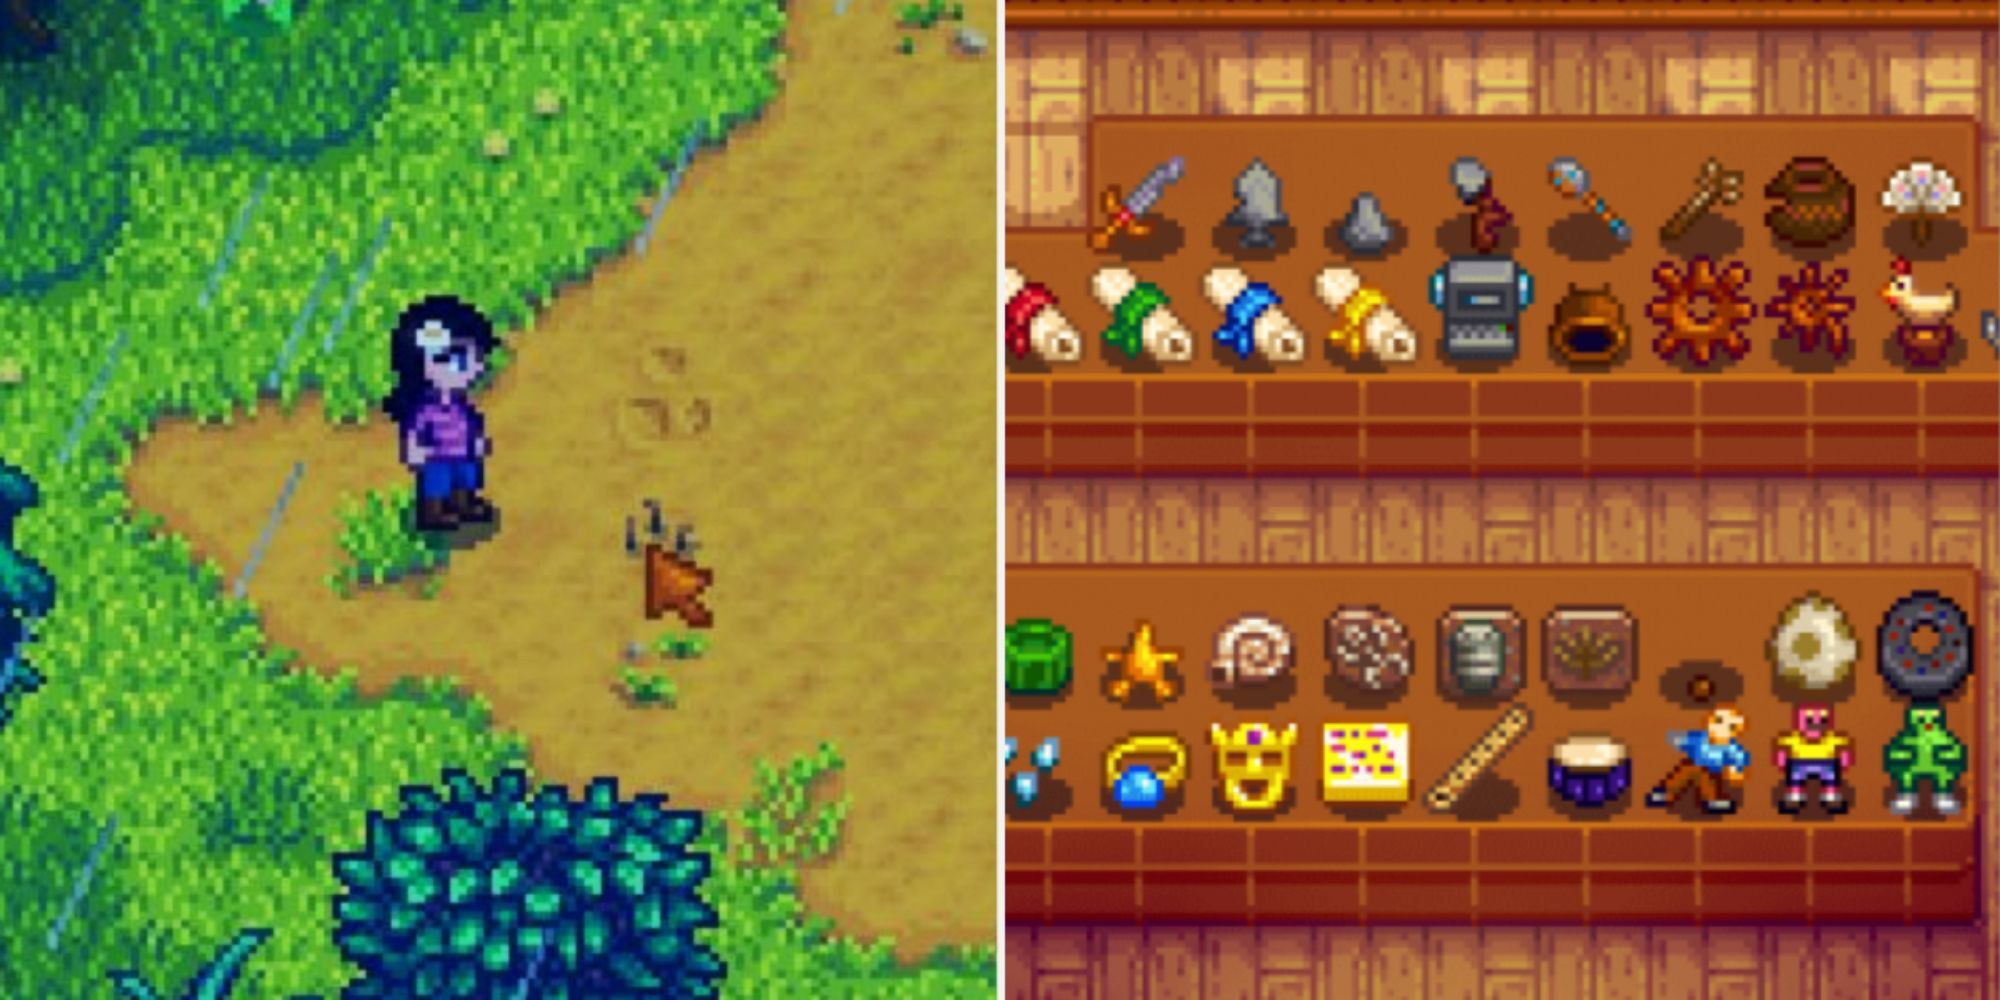 Stardew Valley: Where To Find All The Artifacts